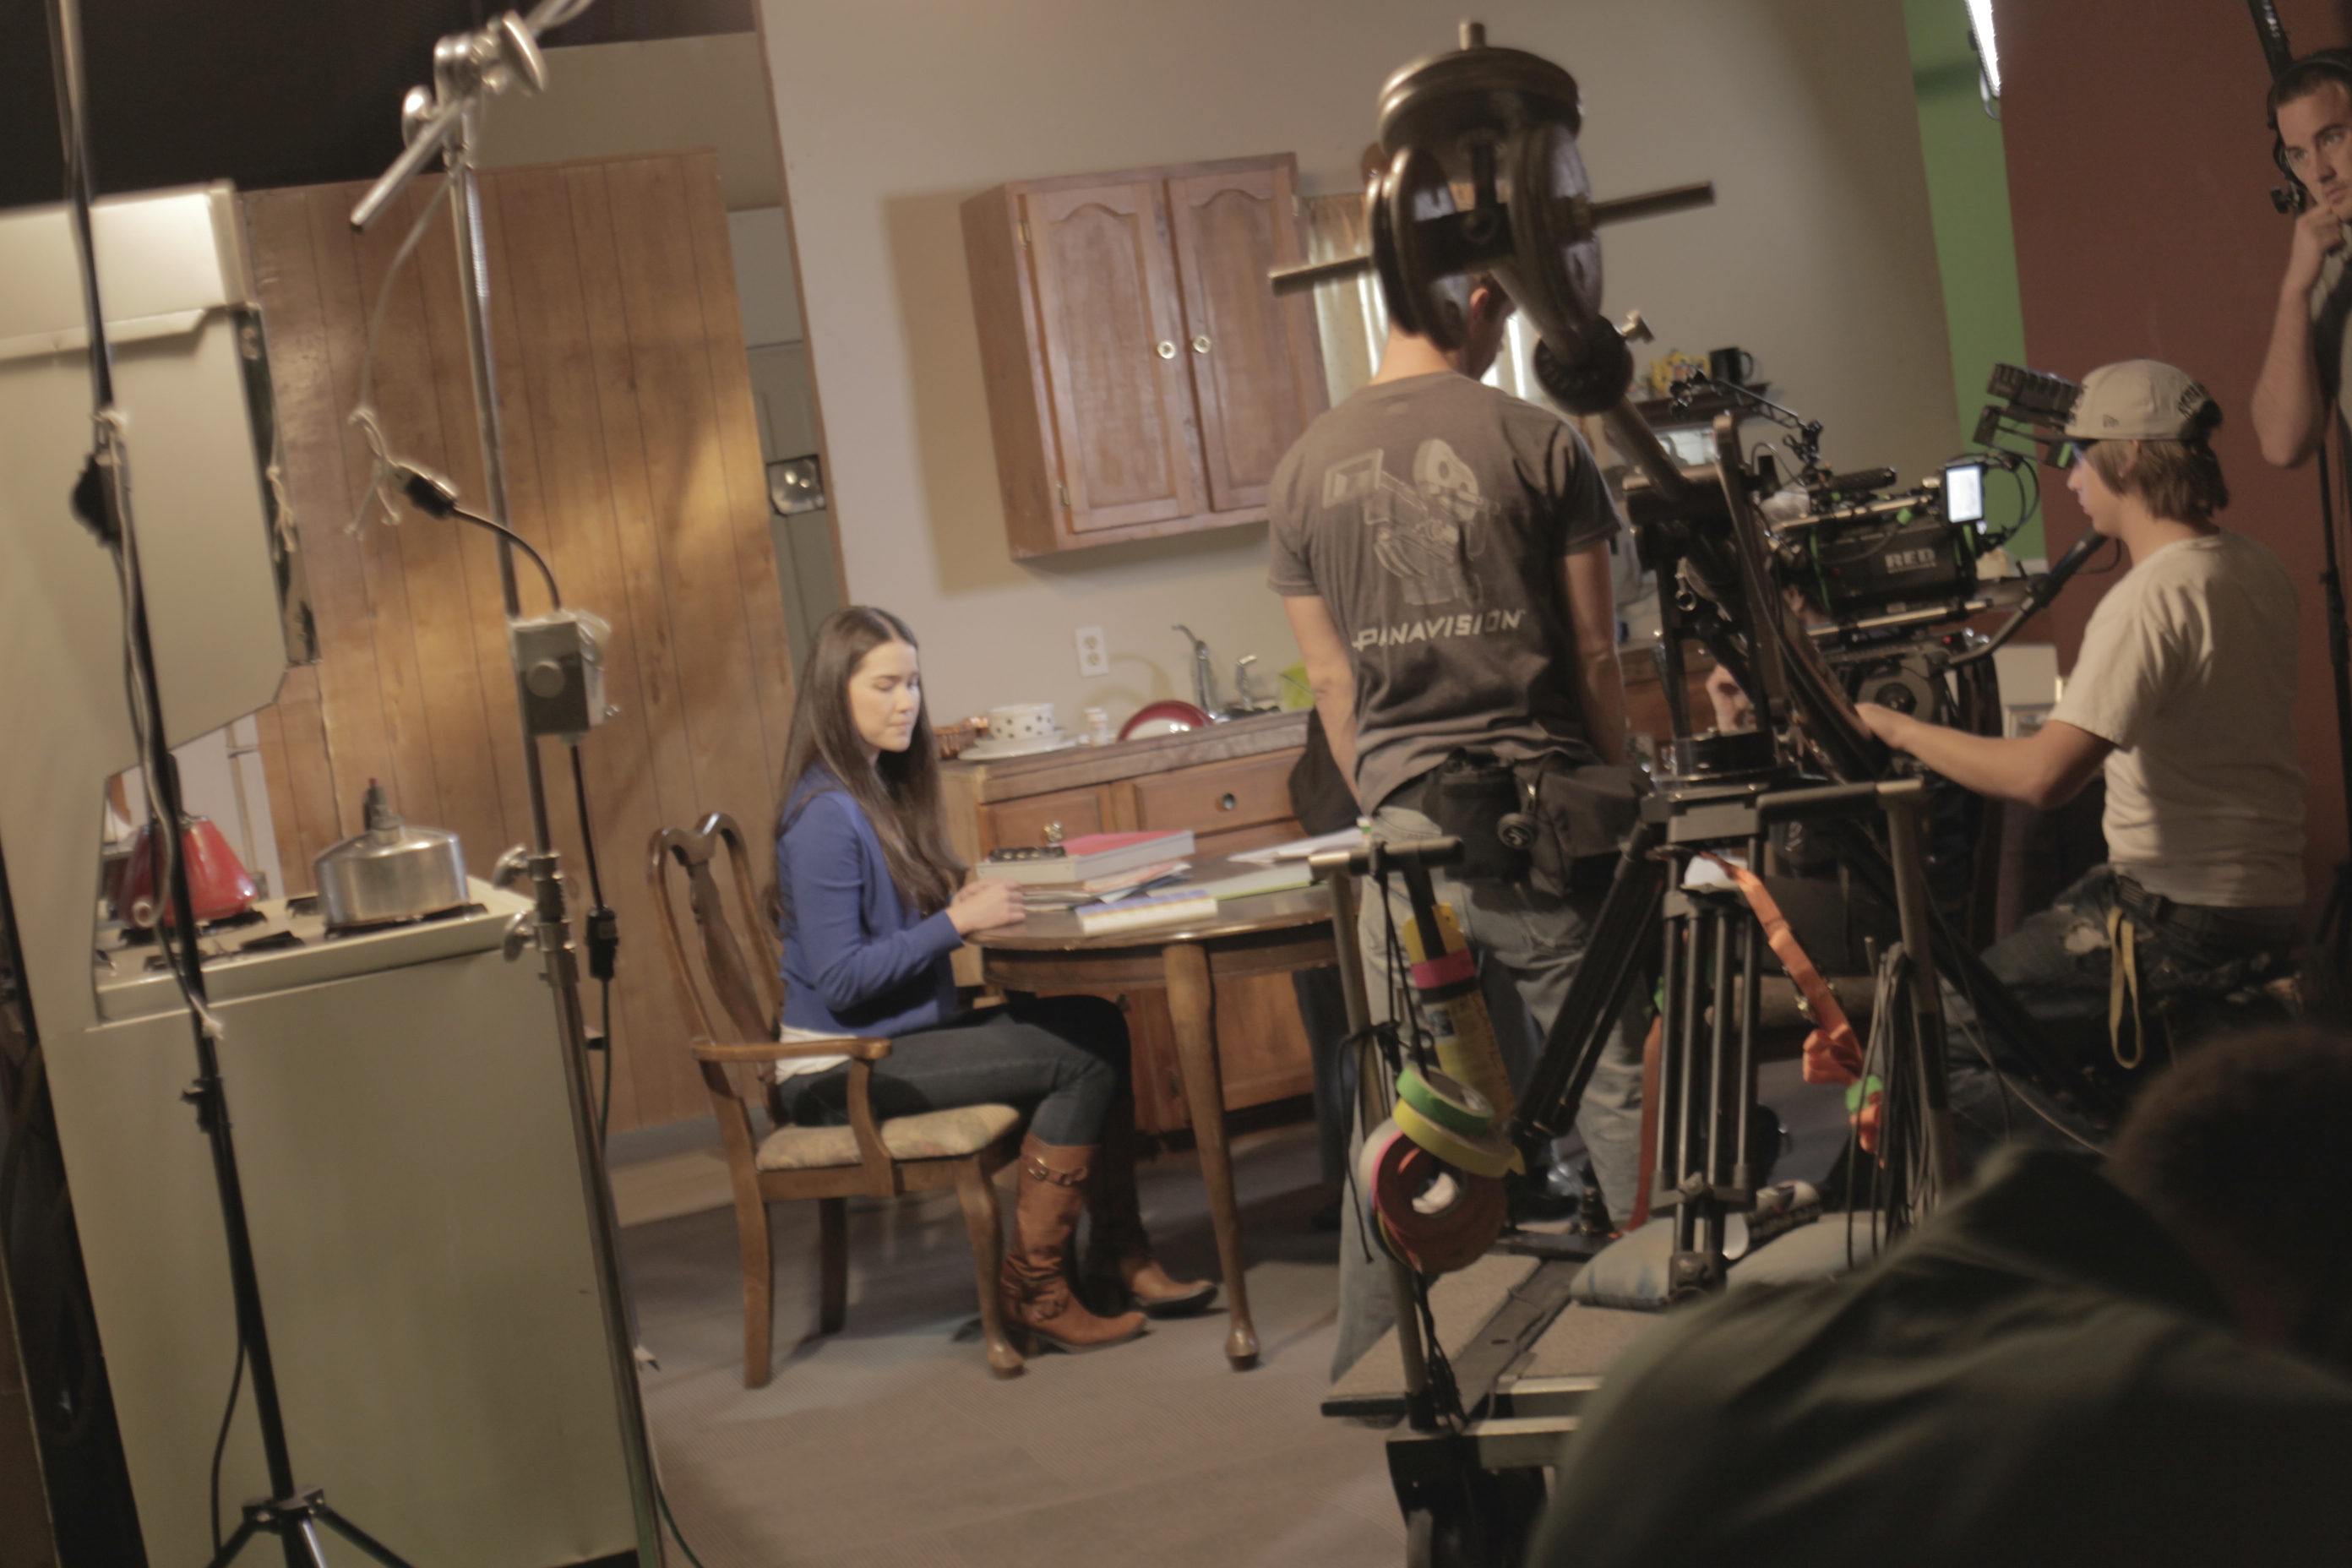 Actress Achara Kirk studies her lines while the crew sets up the equipment to get the next shots that director Bruce B. Gordon blocked.